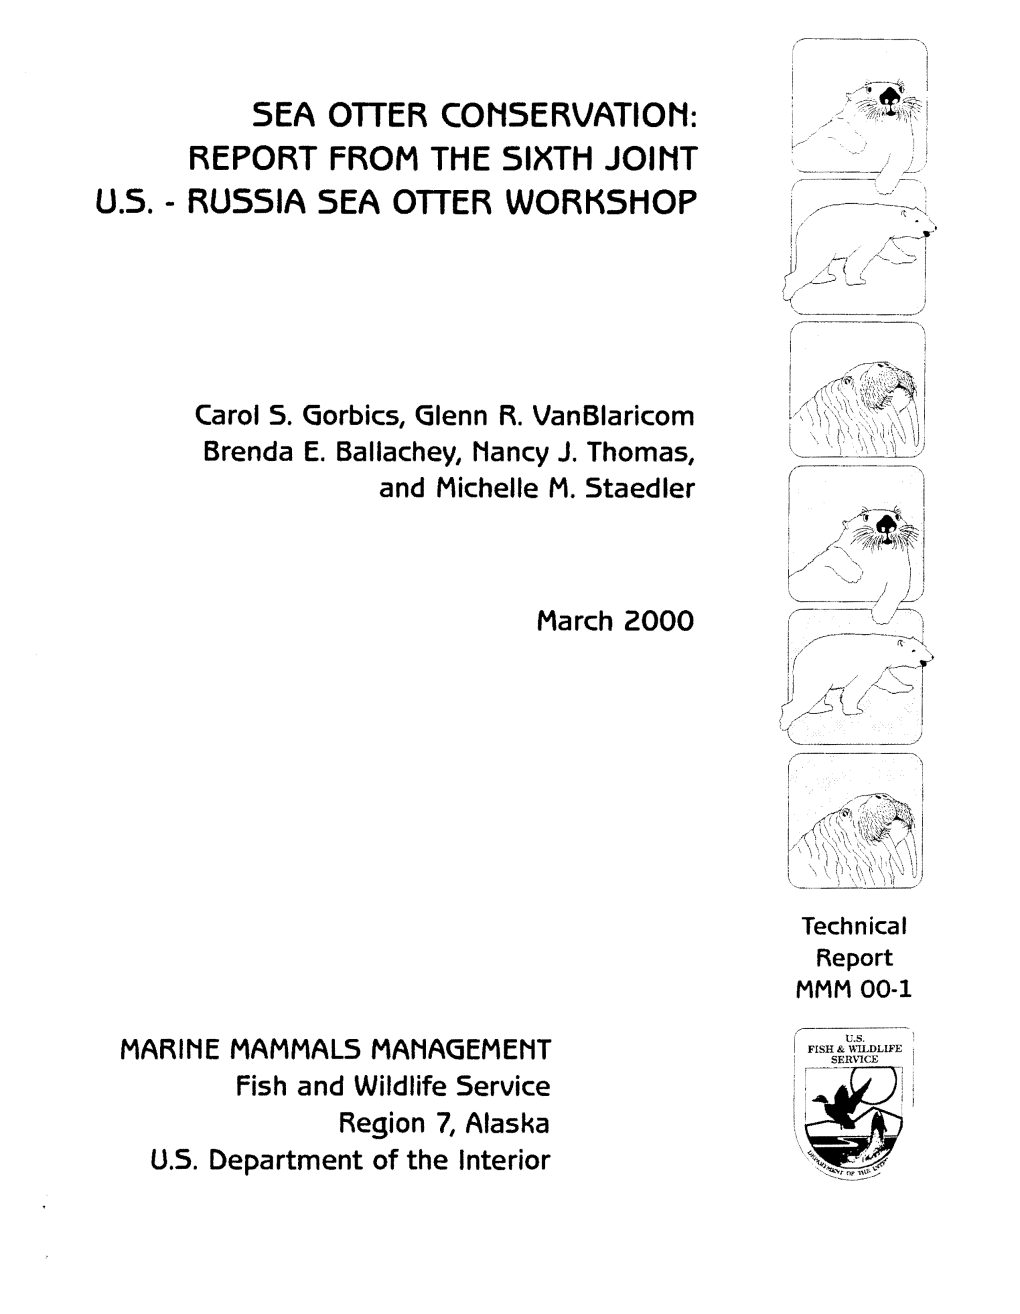 Sea Otter Conservation: Report from the Sixth Joint U.S. - Russia Sea Otter Workshop